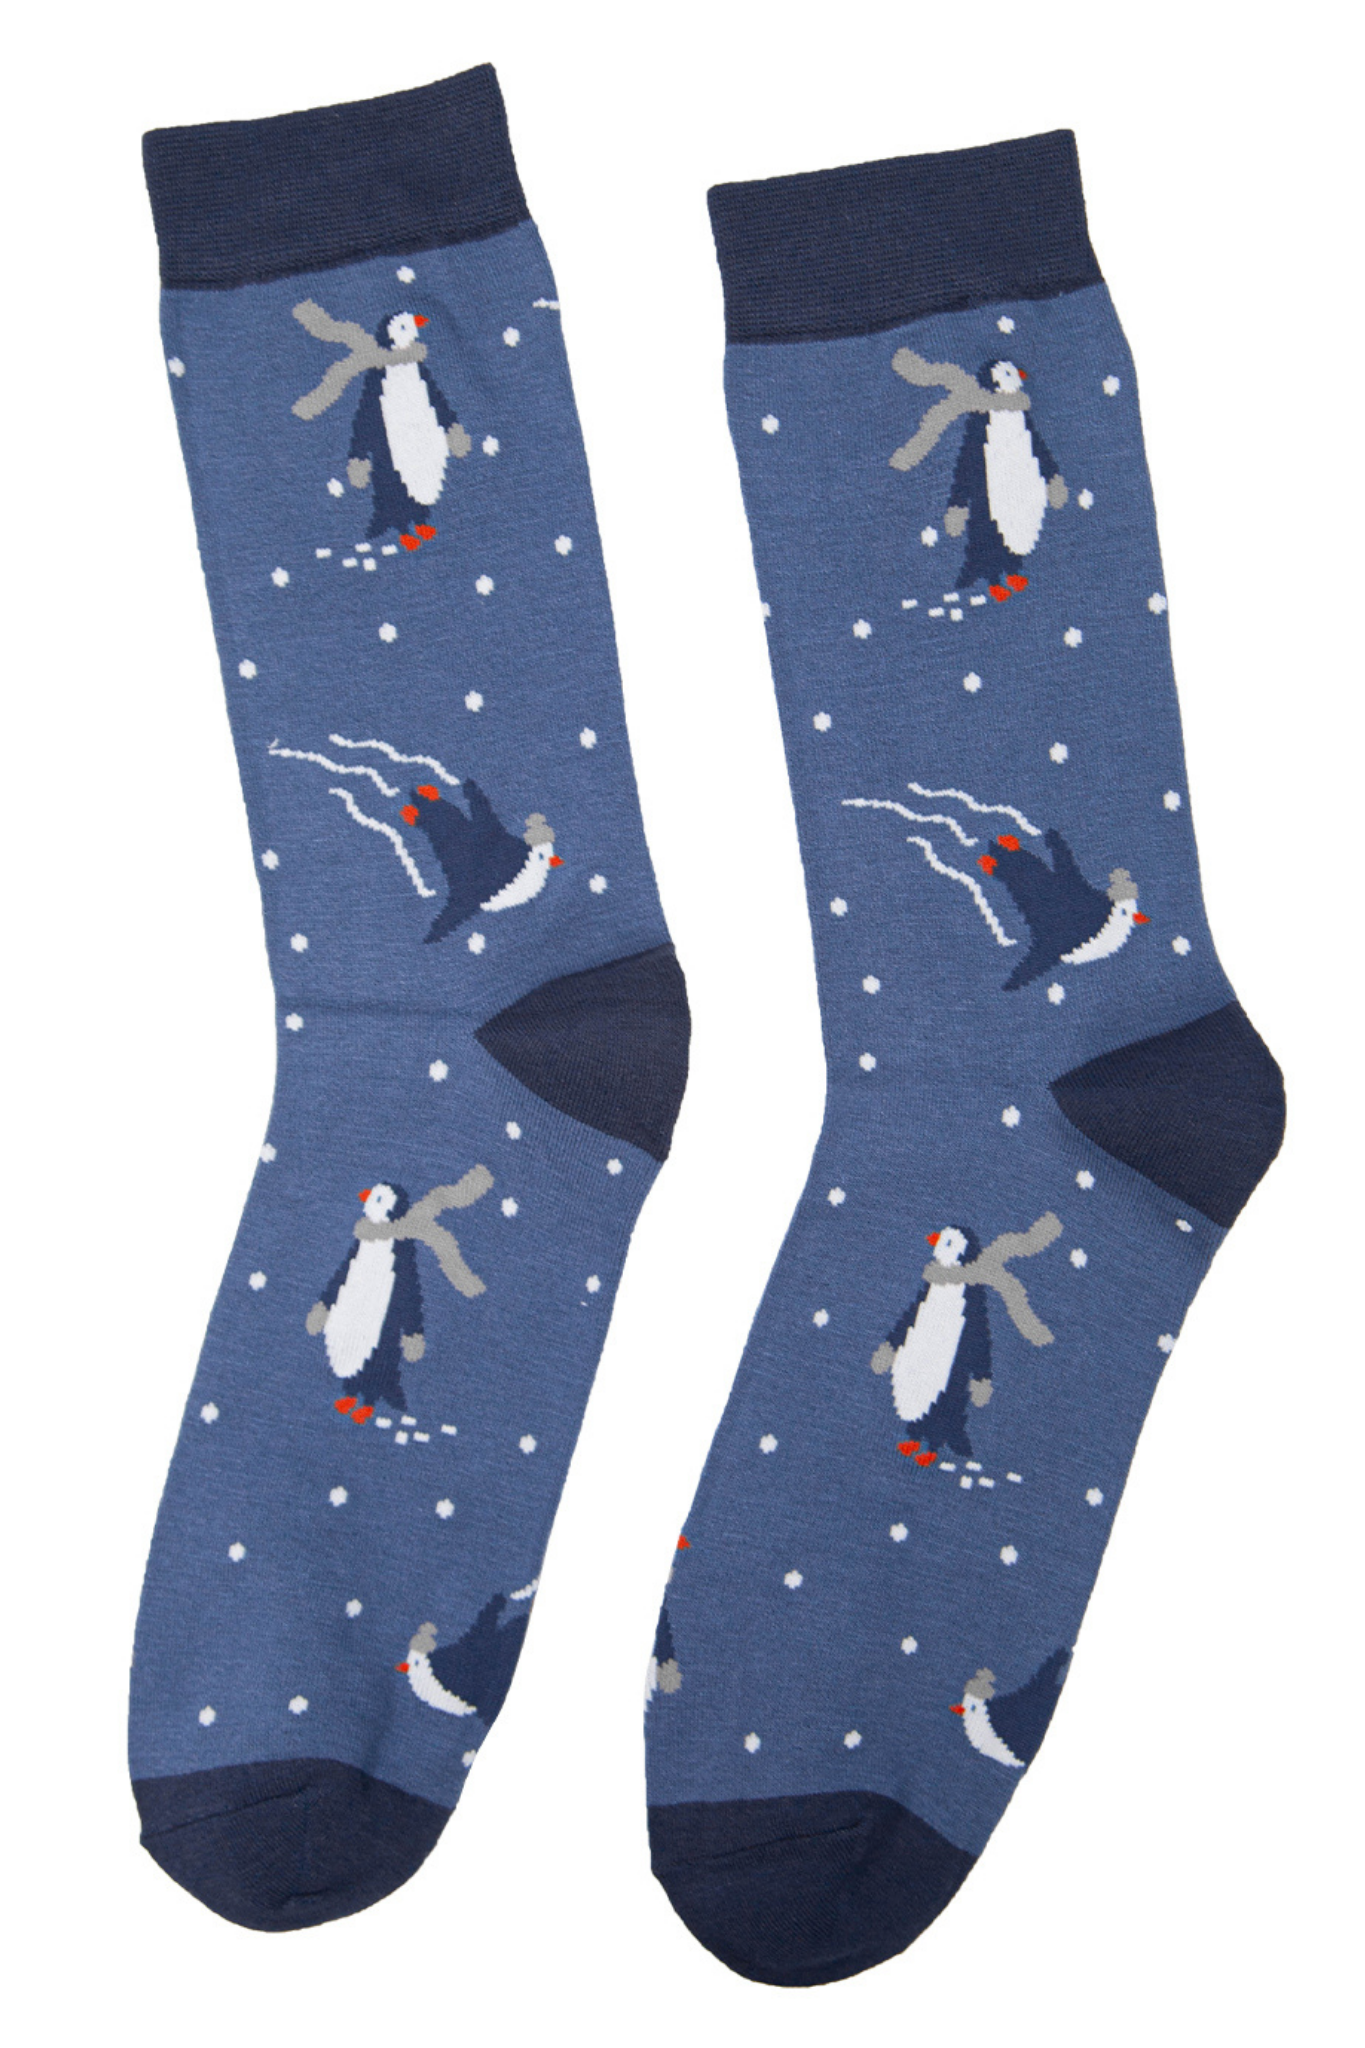 blue dress socks with penguins ice skating in the snow